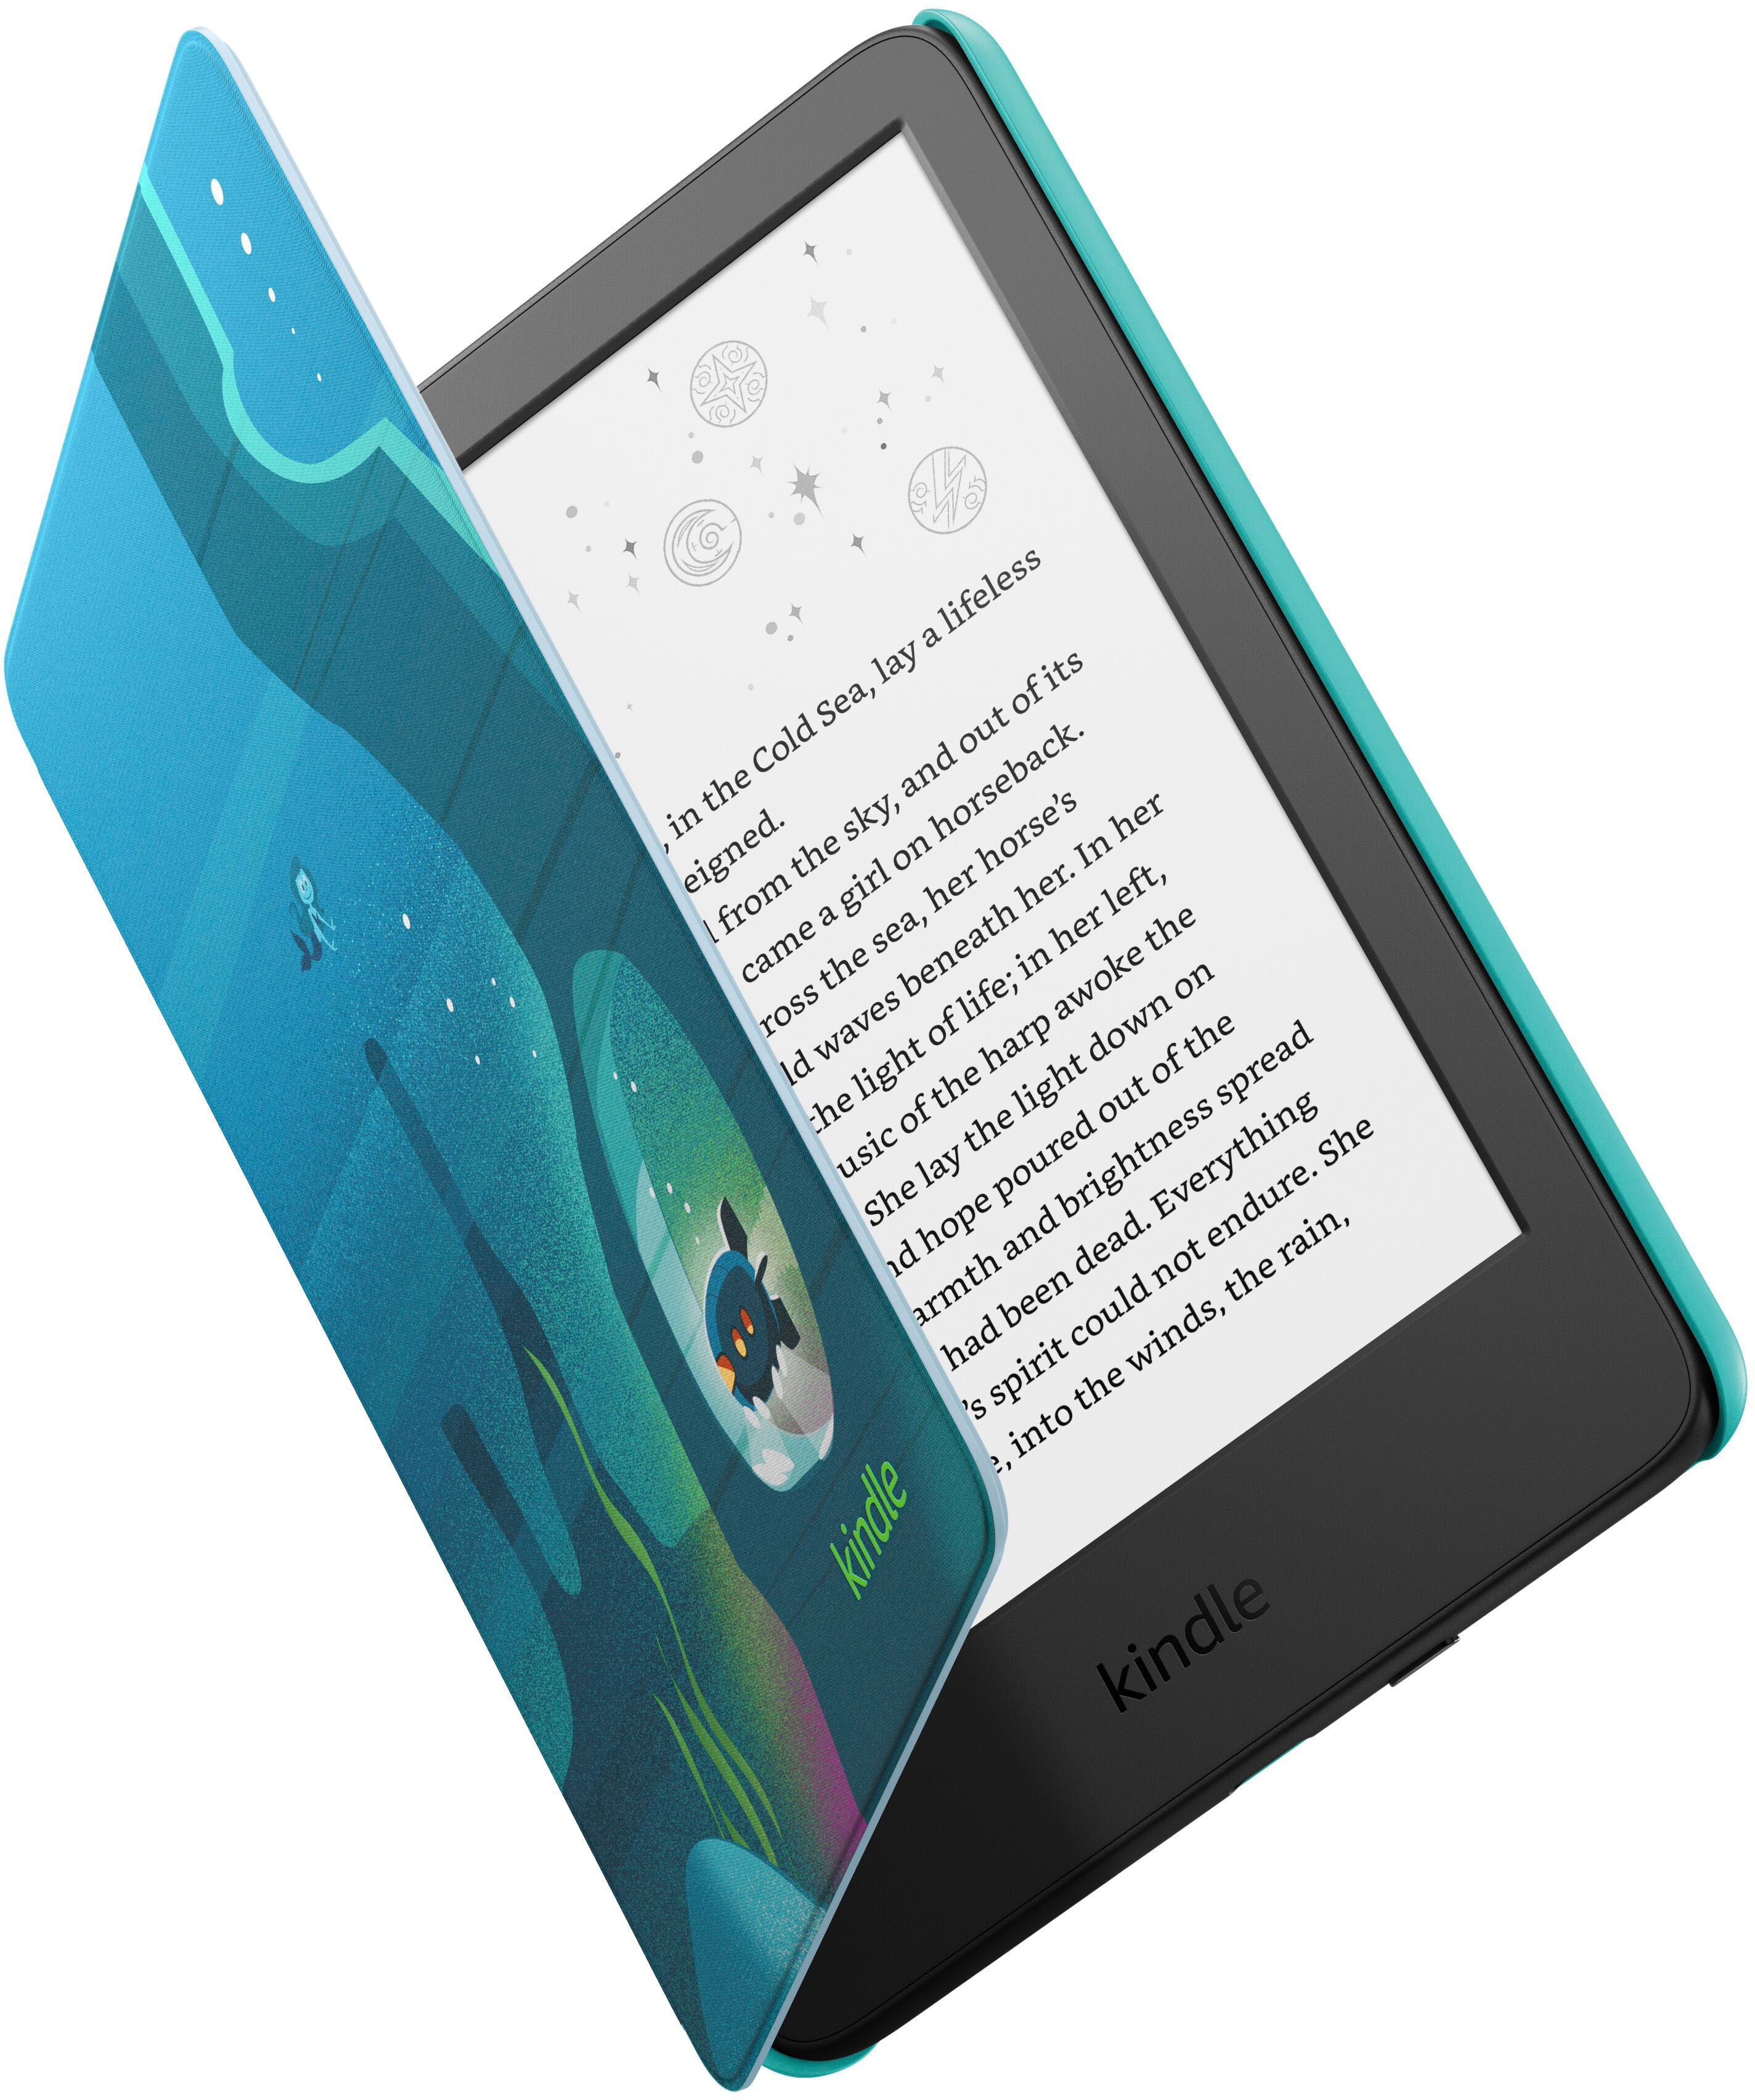 Angle View: Amazon - Kindle Kids E-Reader (2022 release) 6" display with cover - 16GB - 2022 - 2023 - Ocean Explorer